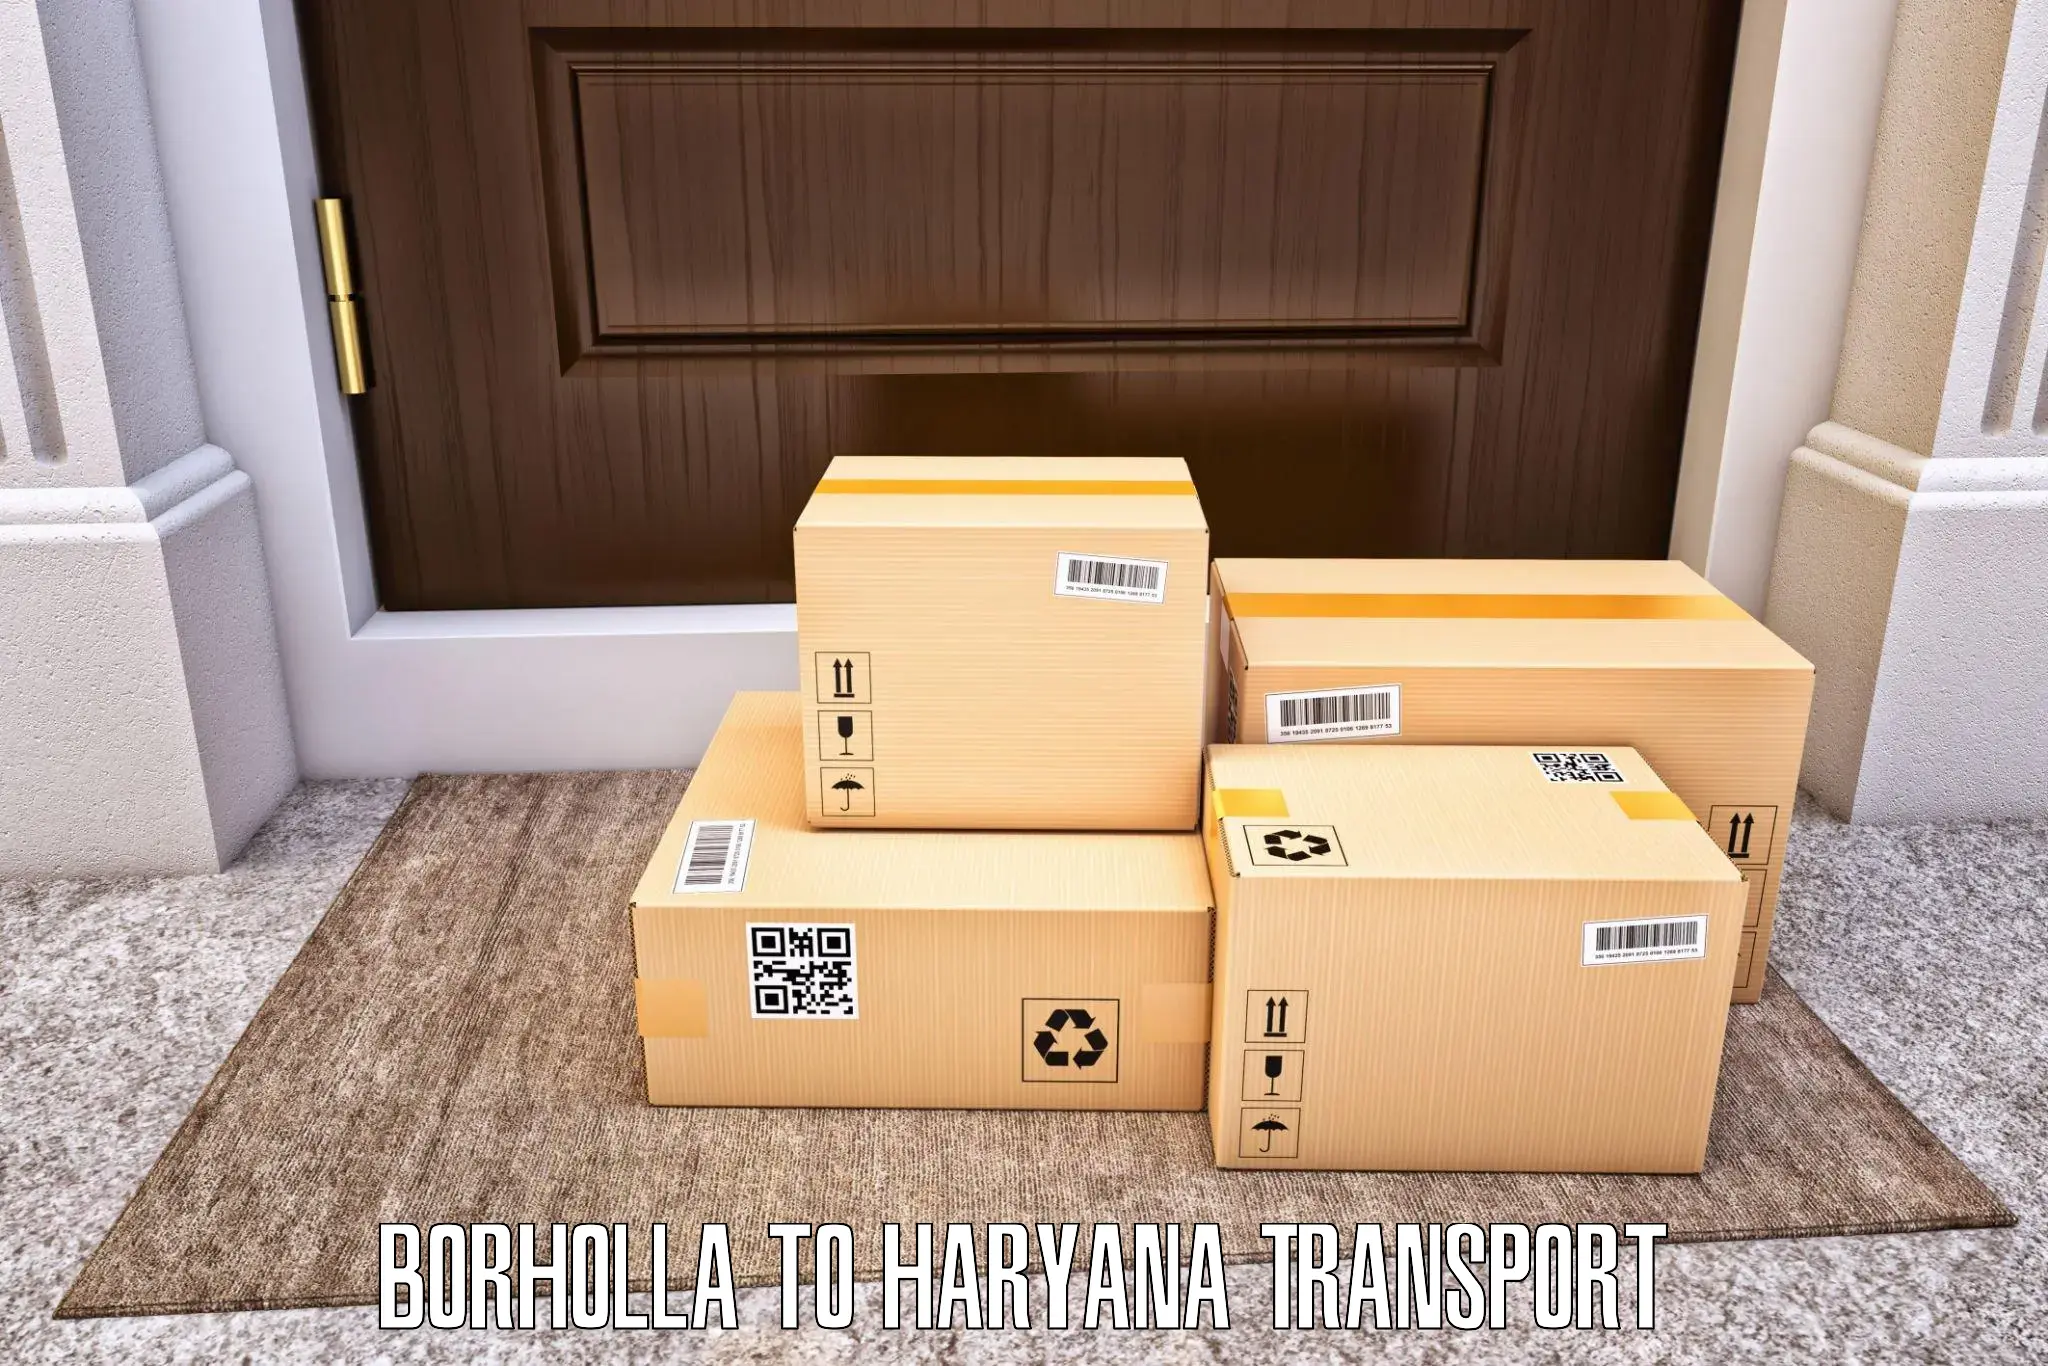 Material transport services Borholla to NCR Haryana